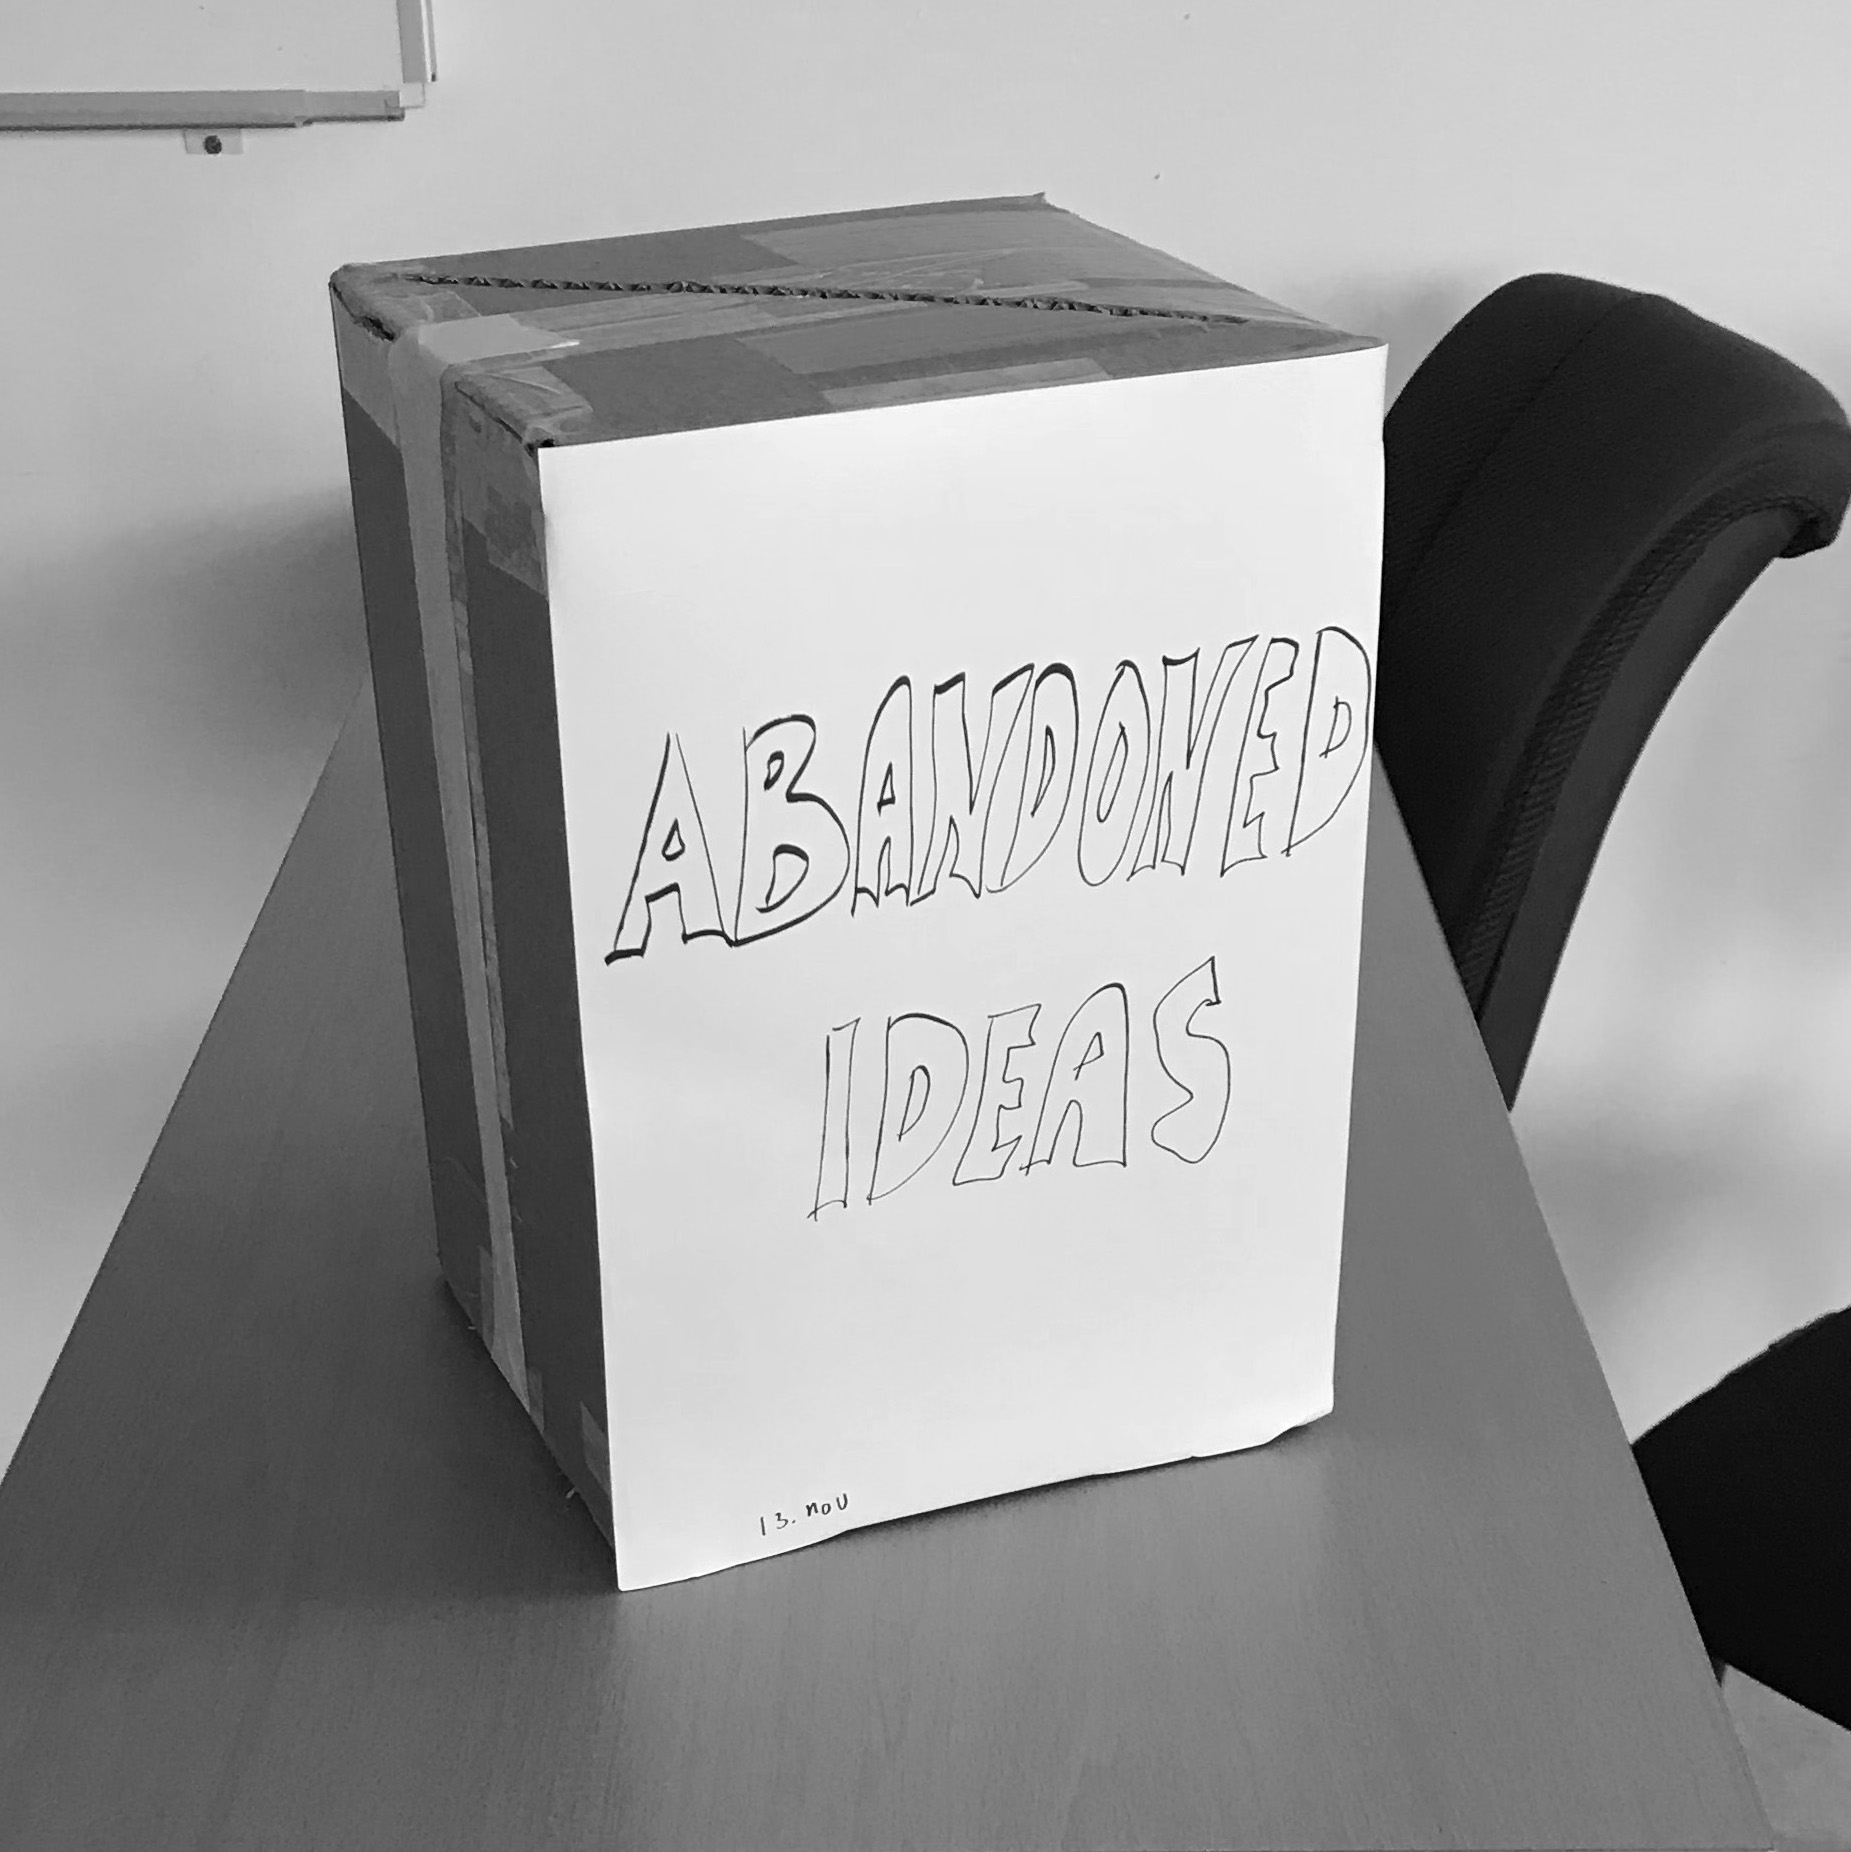 Box with text: Abandoned ideas.